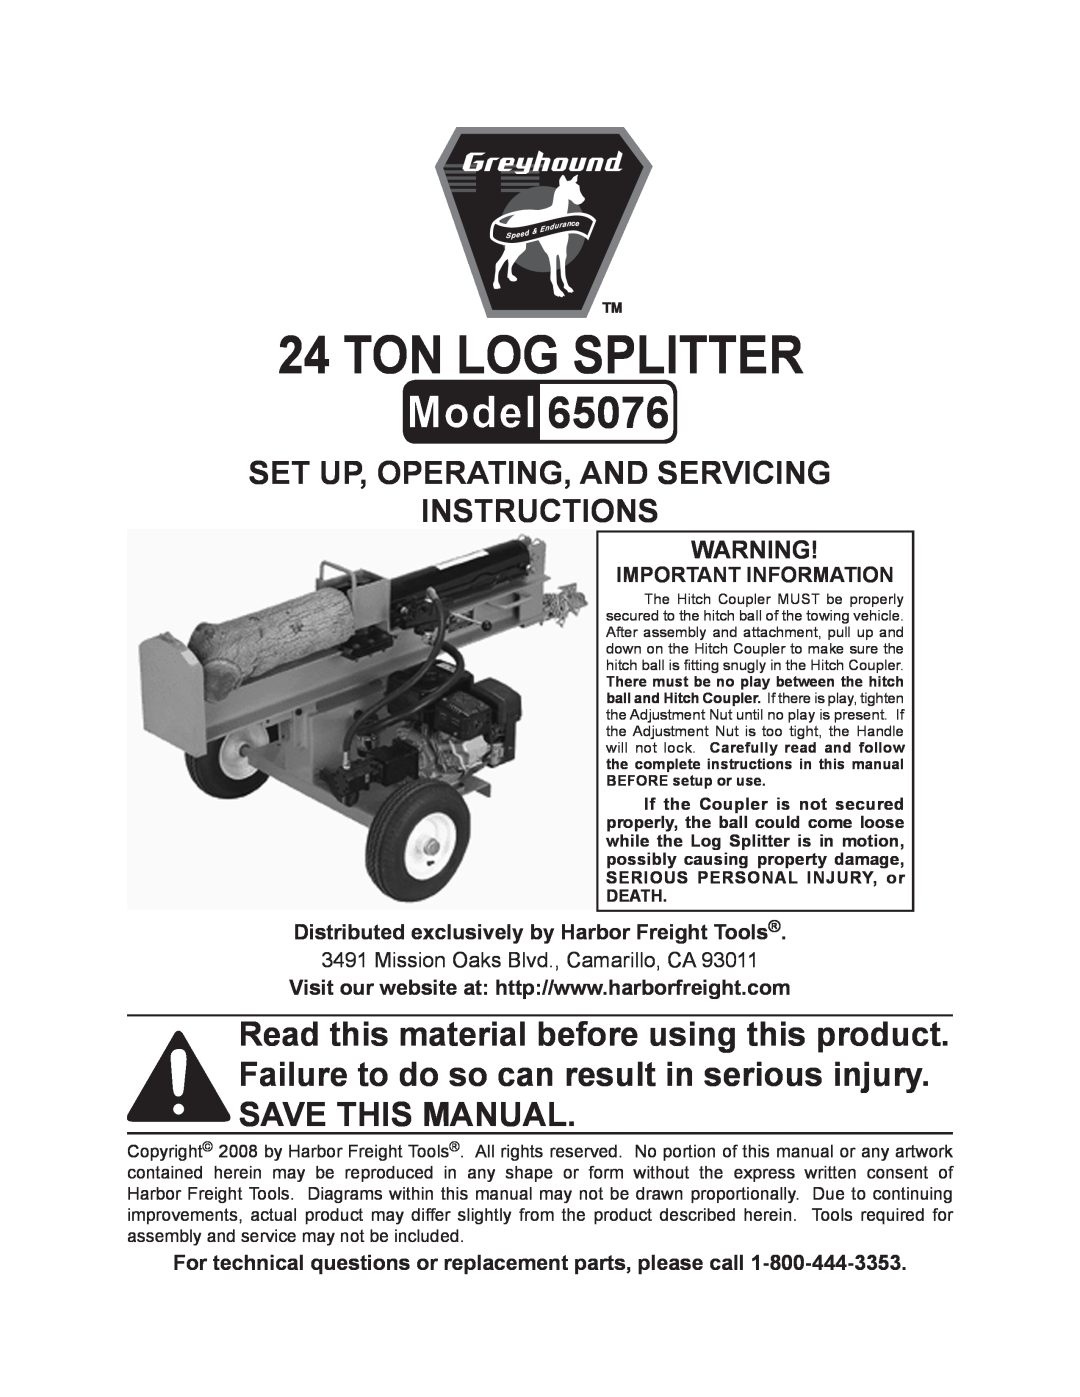 Harbor Freight Tools 65076 manual ton log splitter, Set up, Operating, and Servicing Instructions, Important Information 